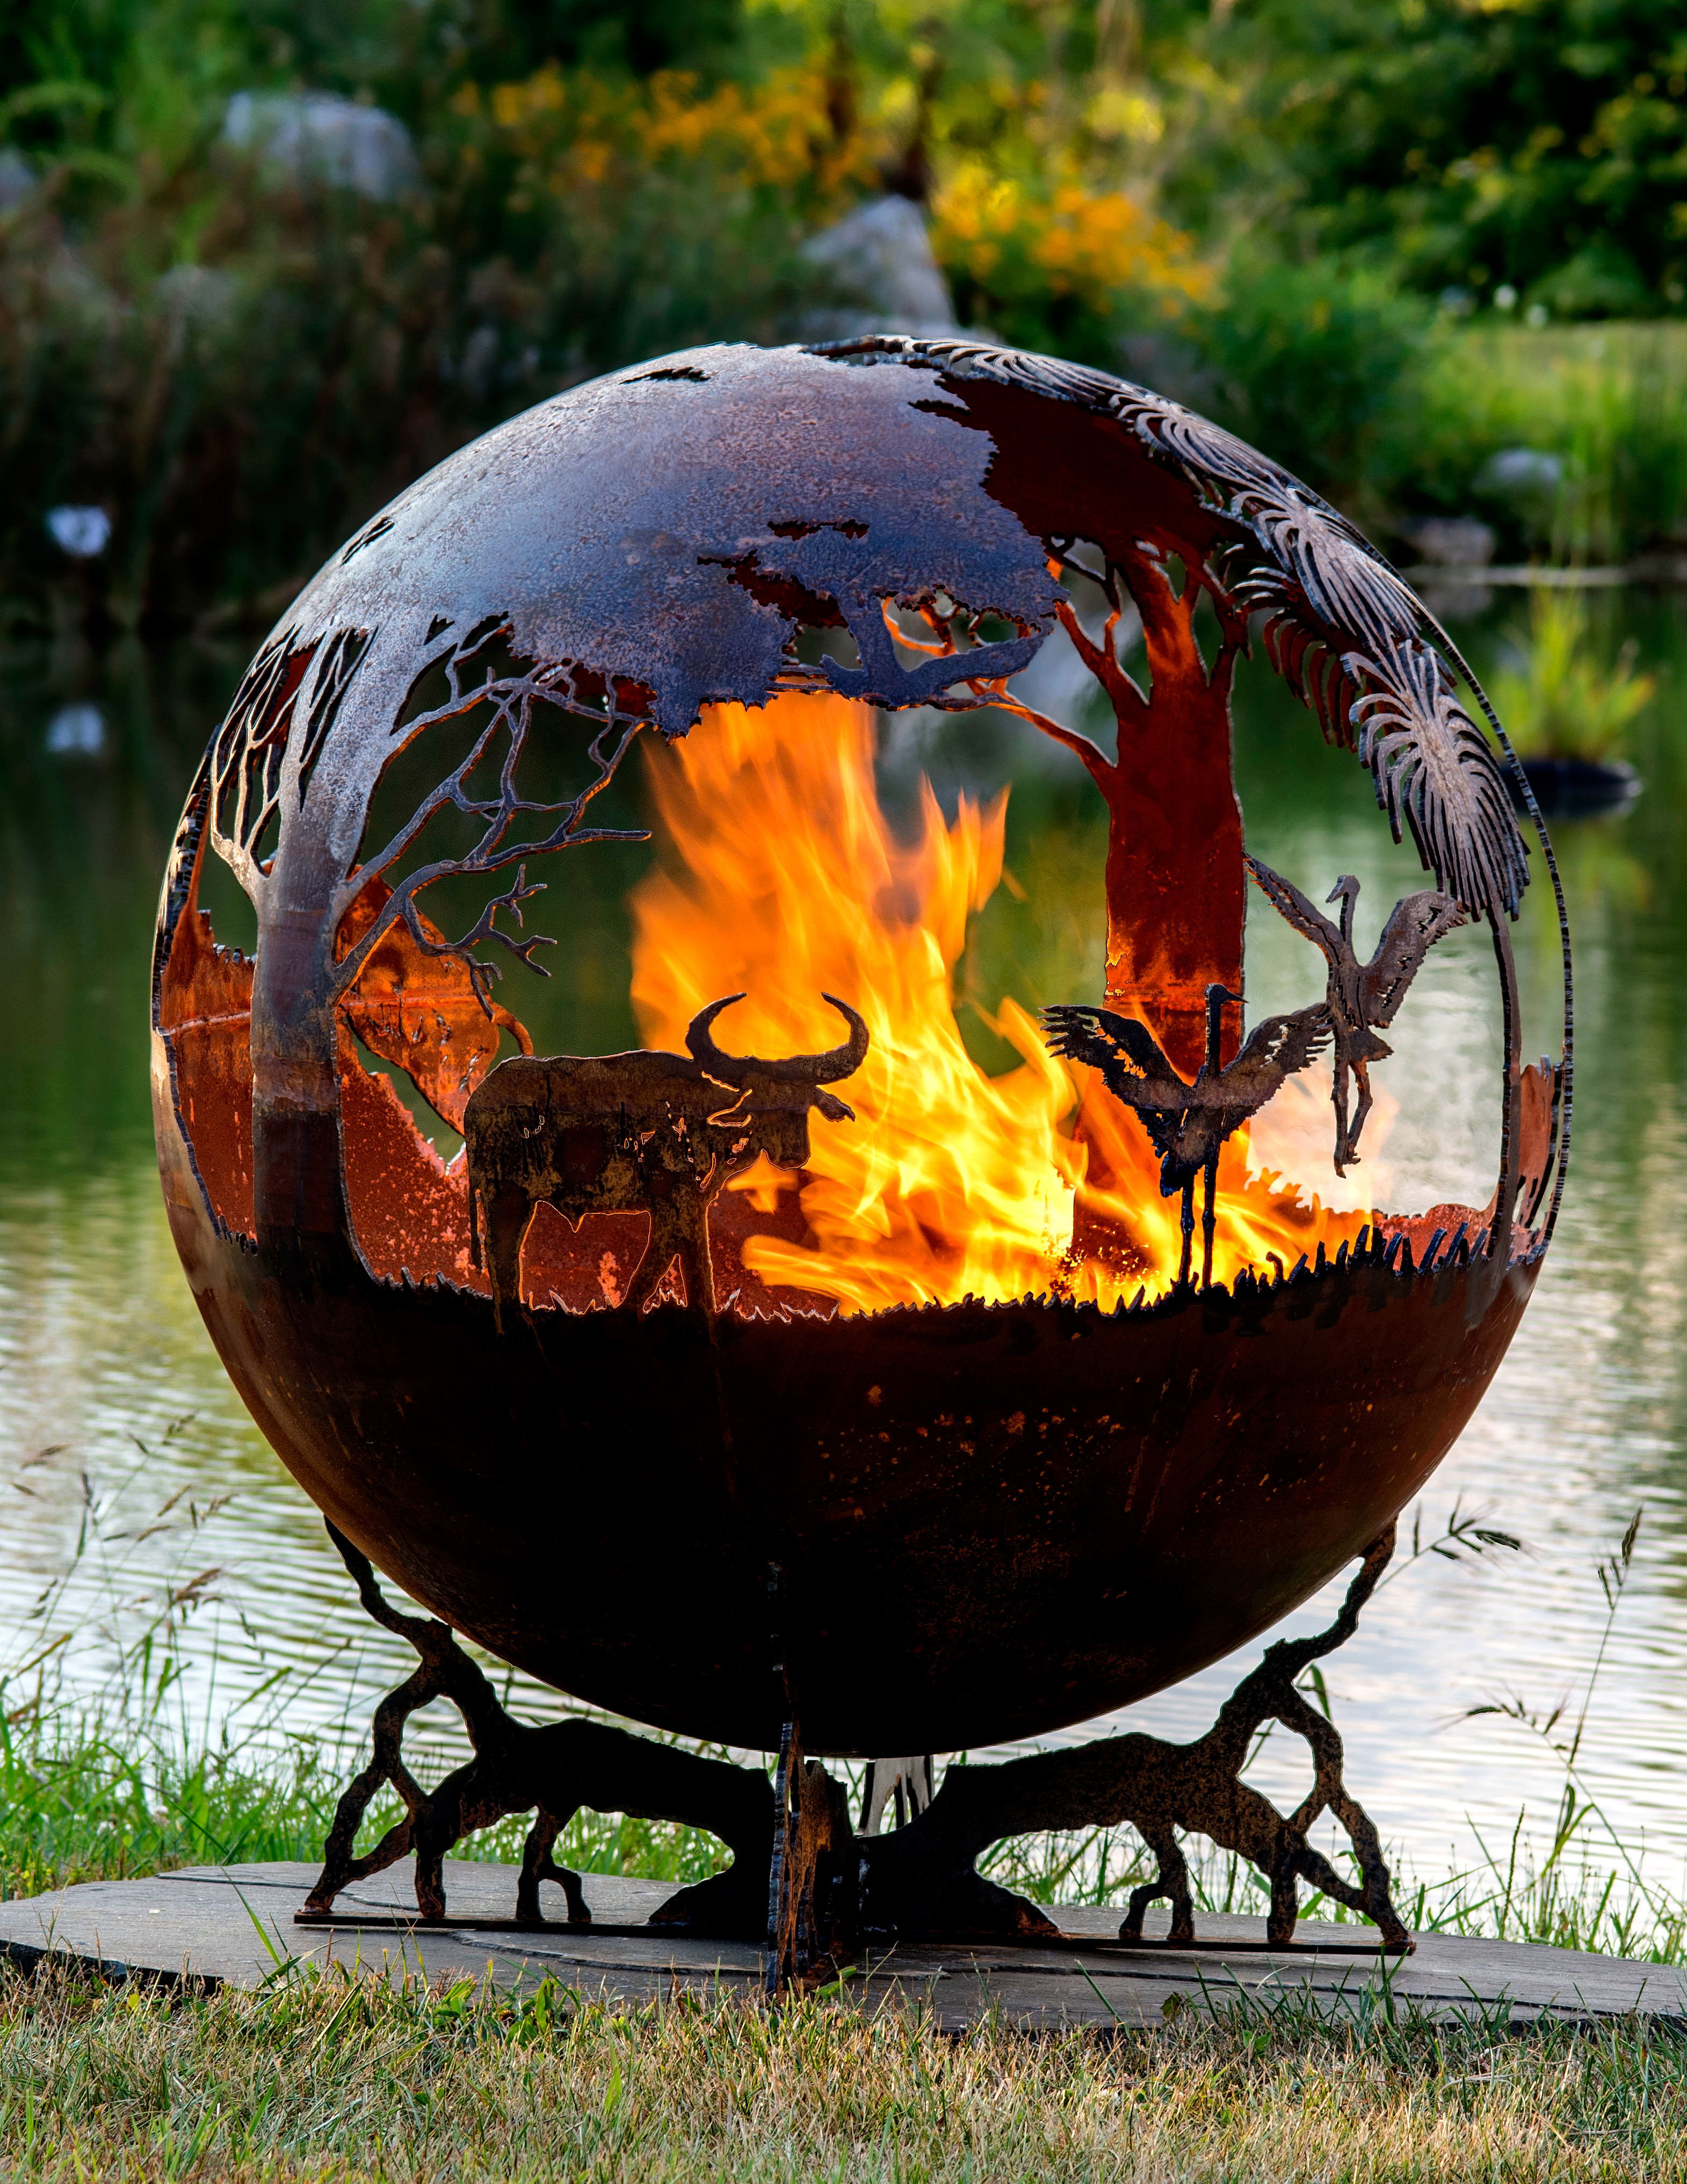 Outback Australia Fire Pit Sphere The Fire Pit Gallery regarding measurements 3141 X 4066